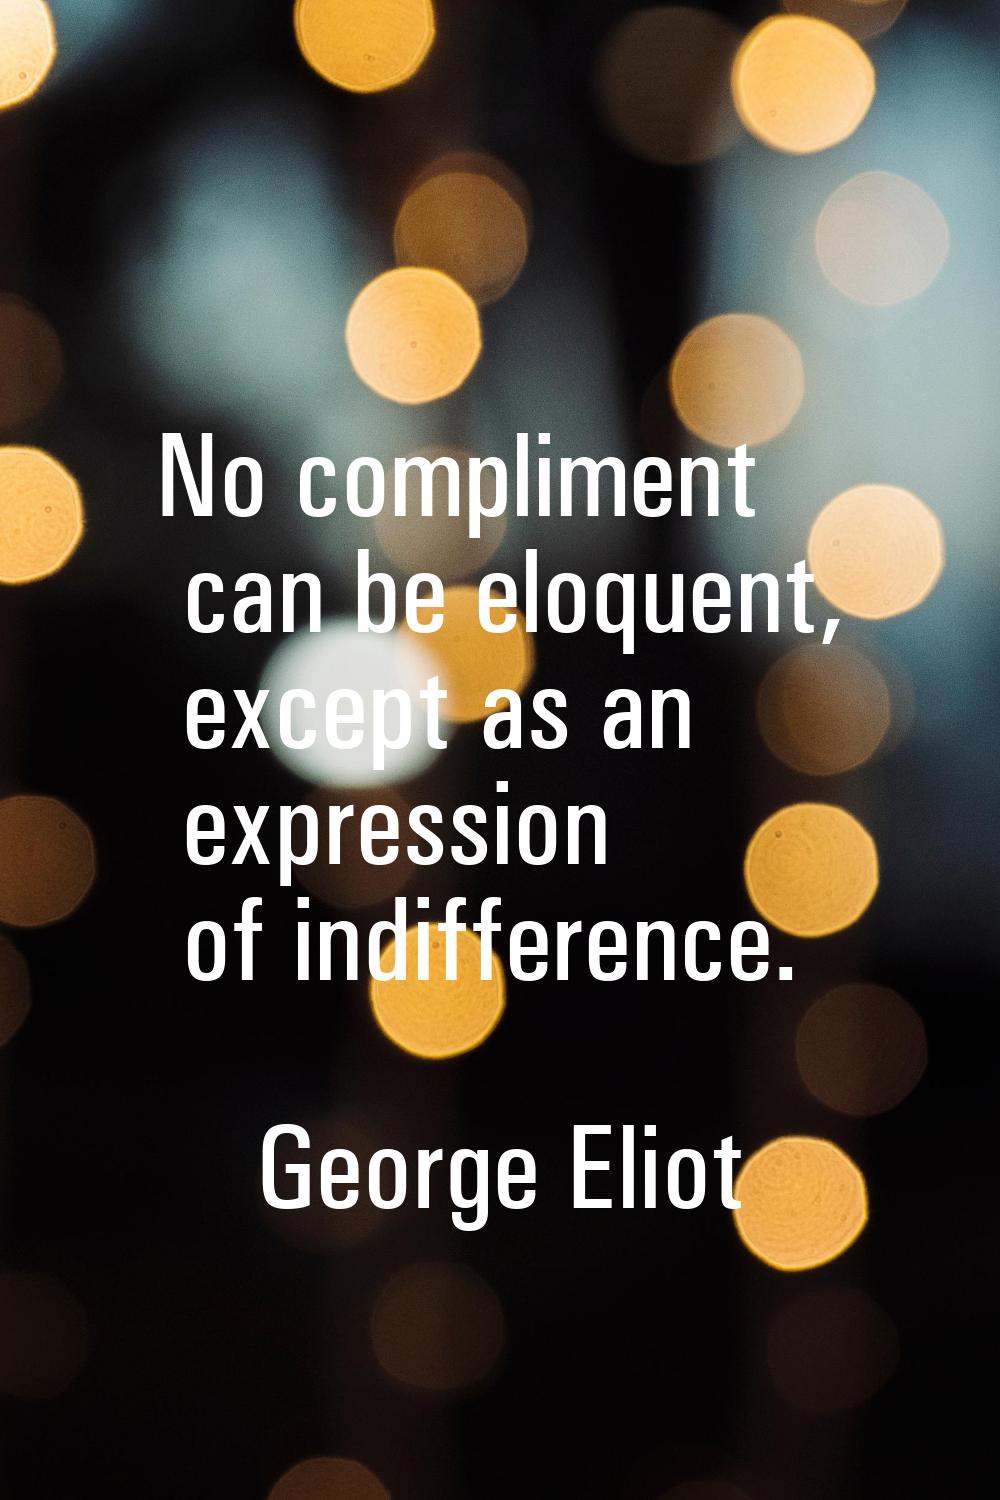 No compliment can be eloquent, except as an expression of indifference.